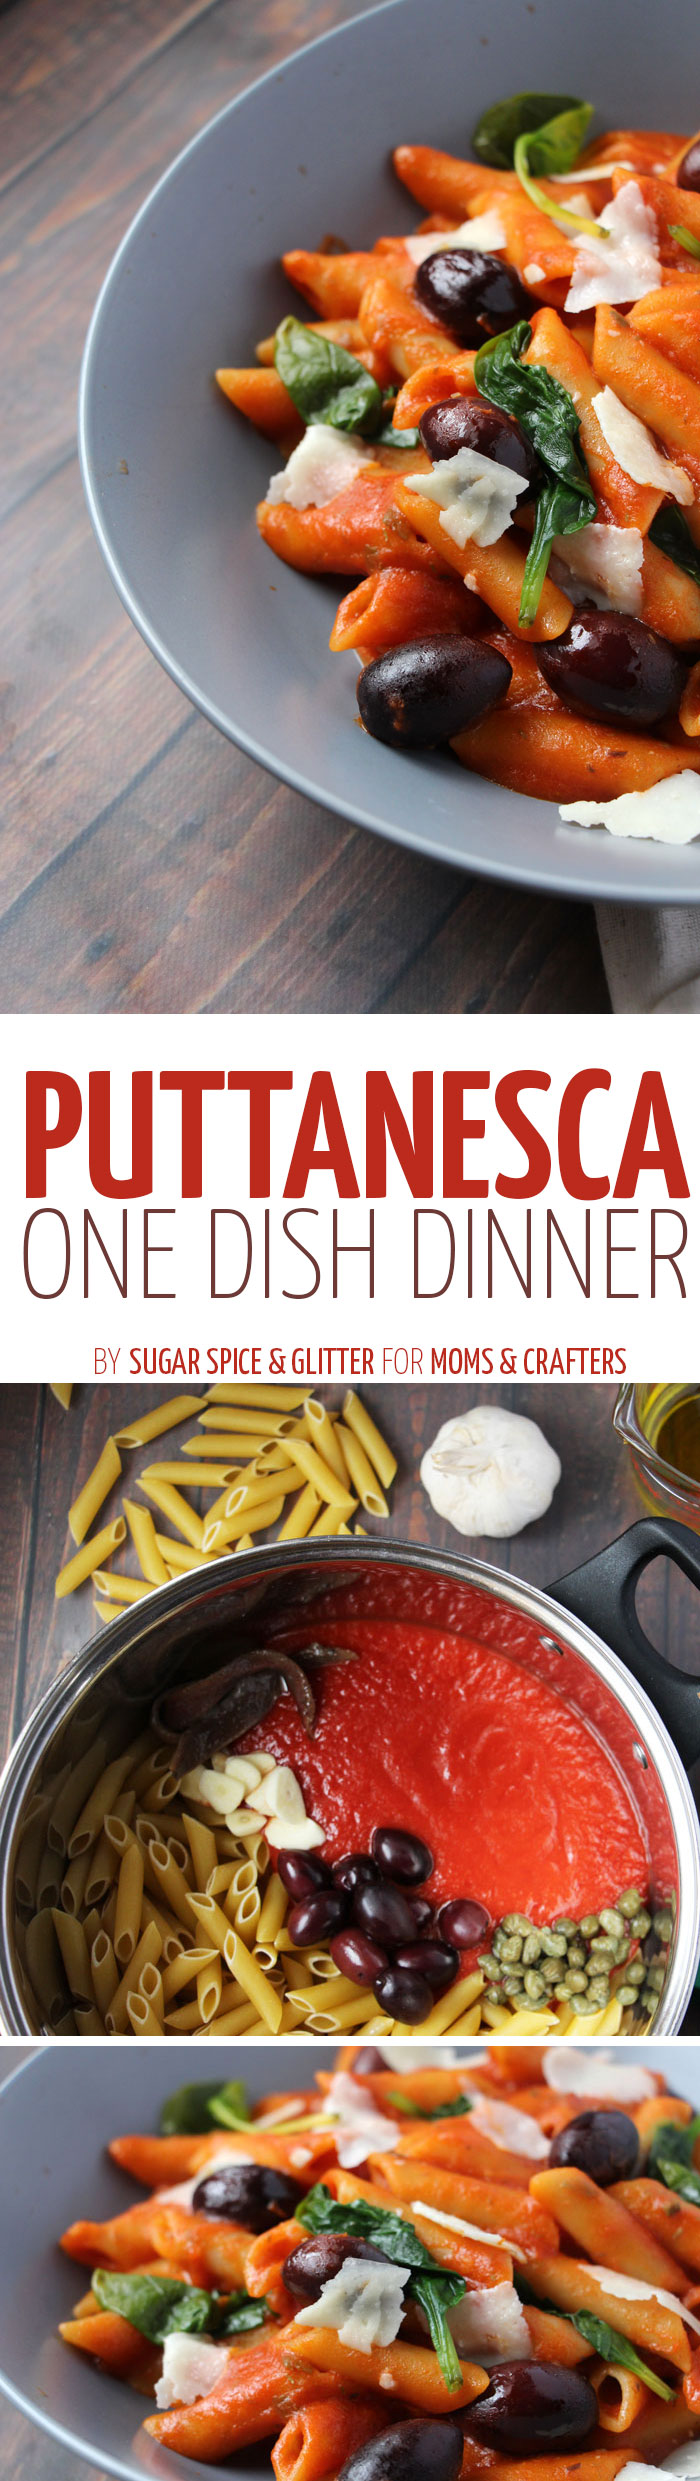 Make this delicious pasta puttanesca one-pot dinner recipe! This easy single dish meal is totally kid-friendly, plus it's kosher too! Perfect for busy moms...